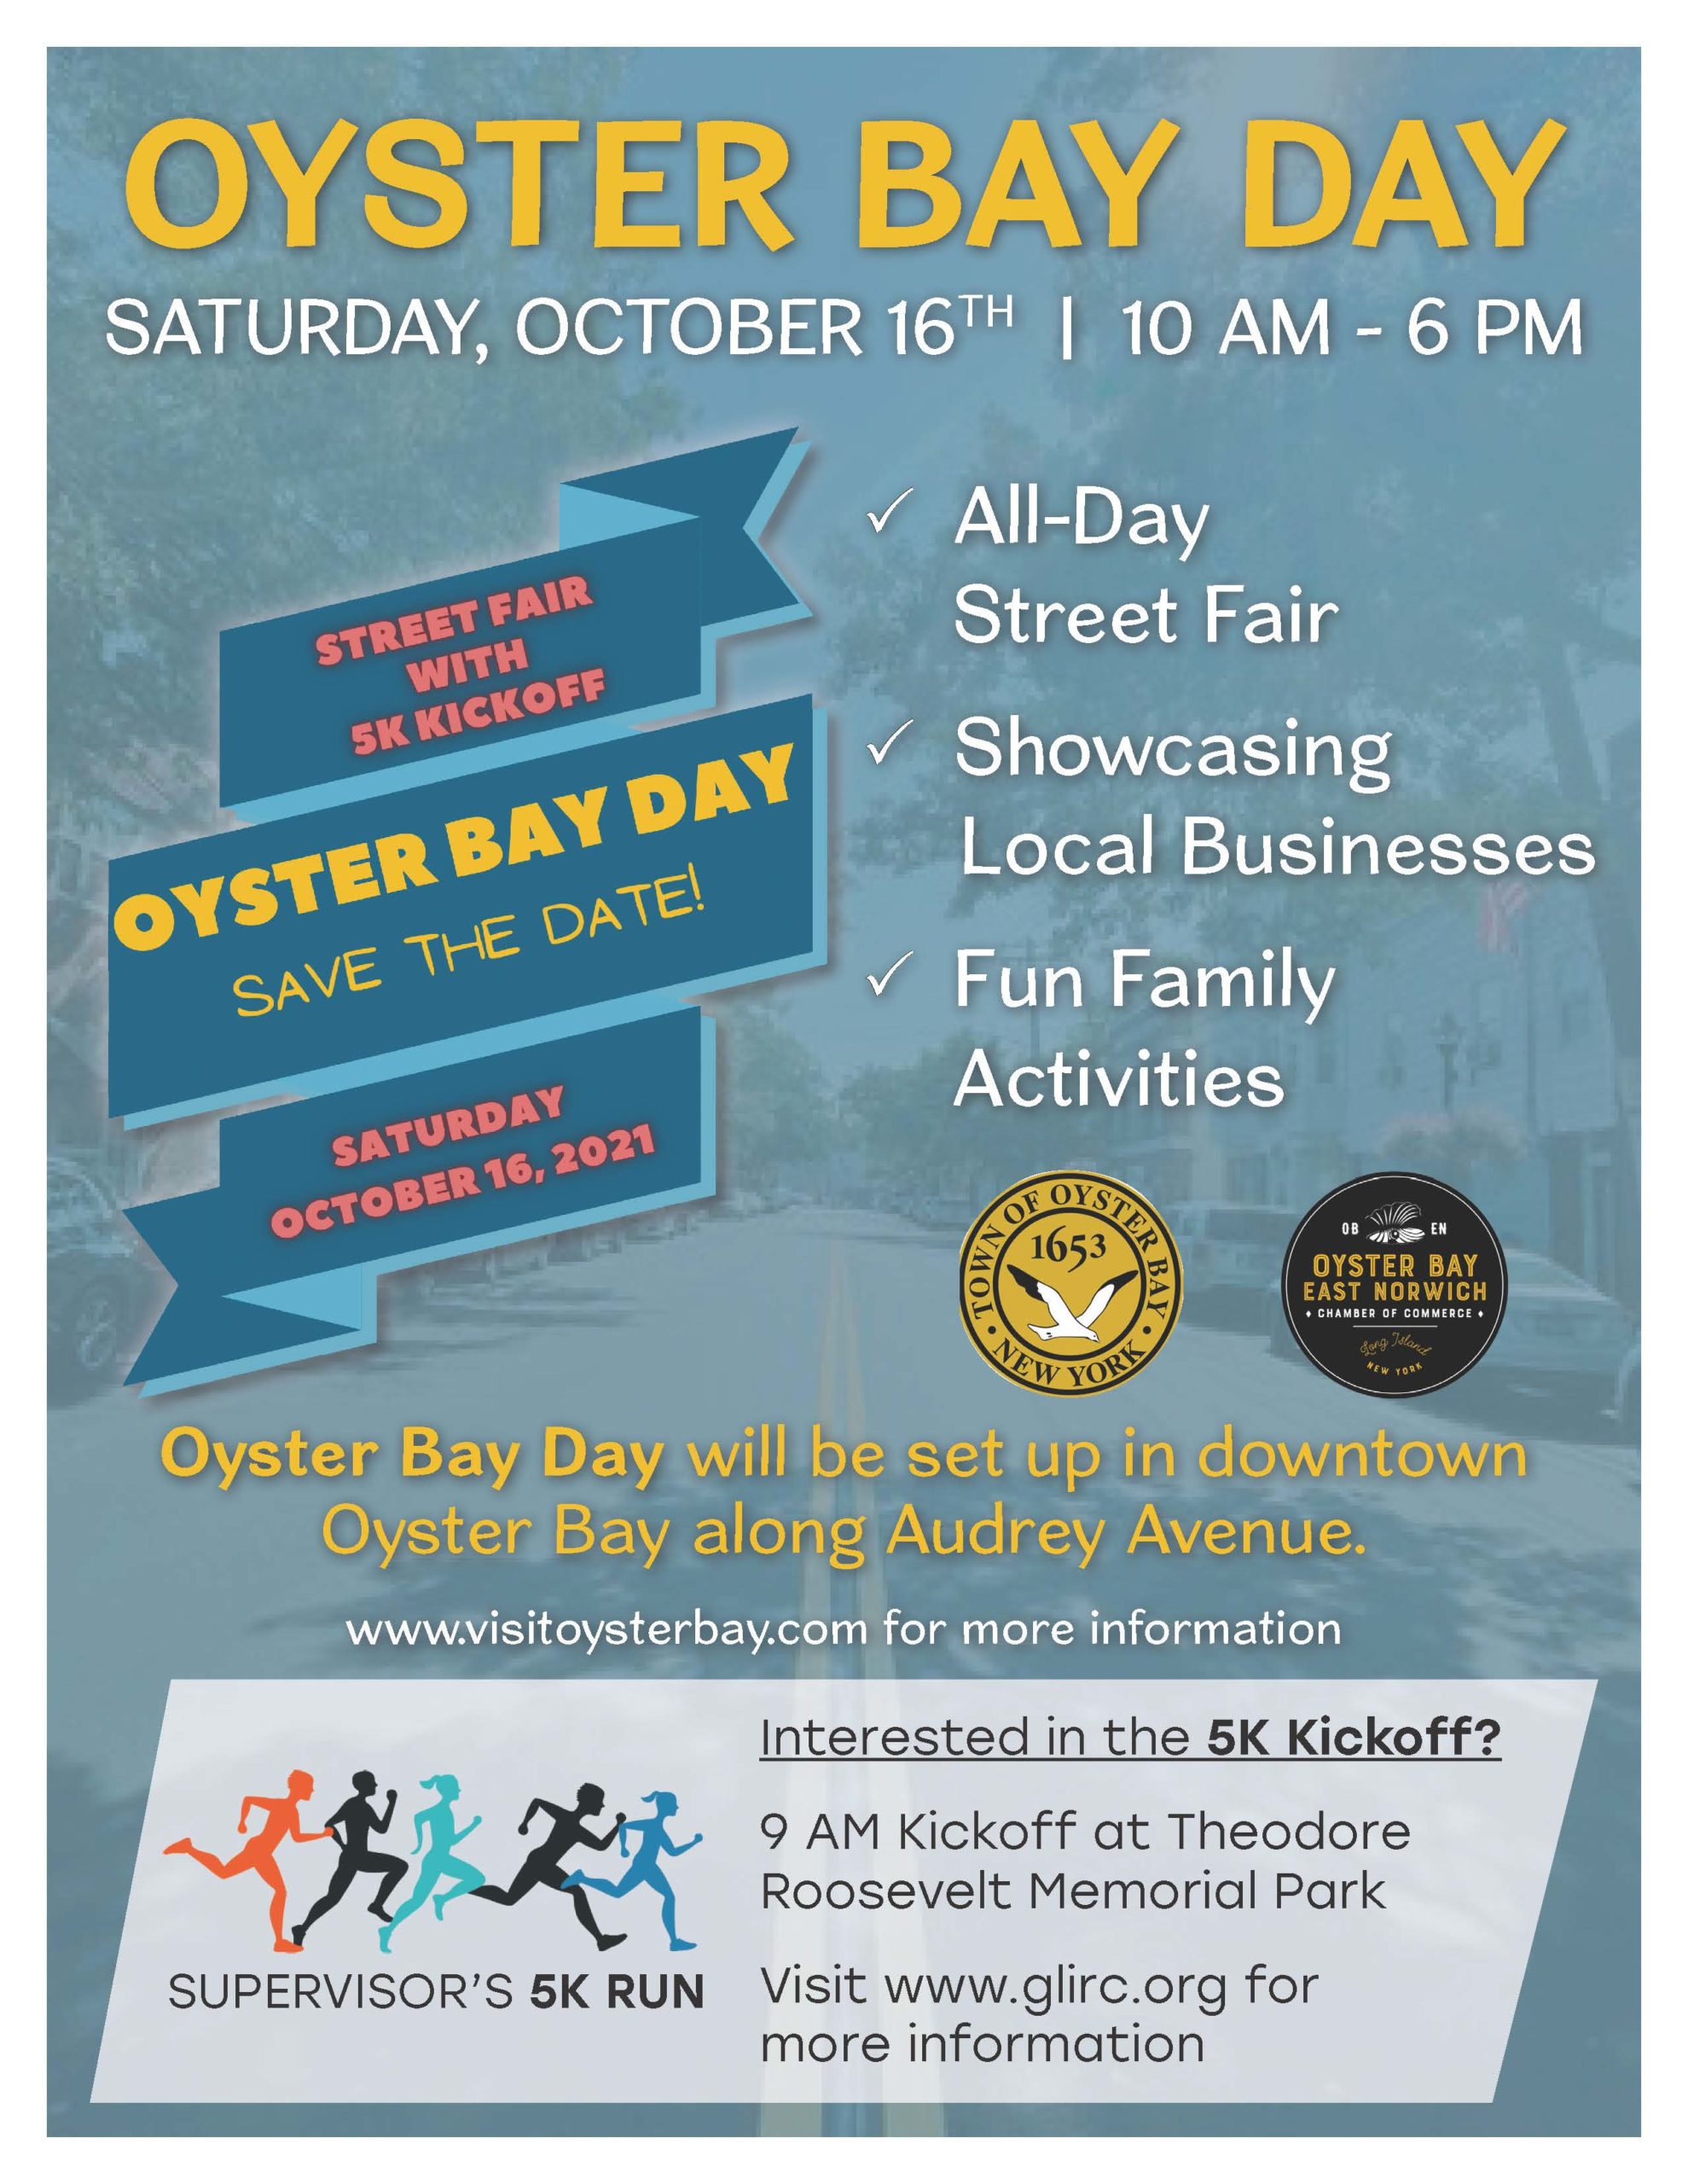 saladino-and-lamarca-invite-residents-to-oyster-bay-day-saturday-october-16th-town-of